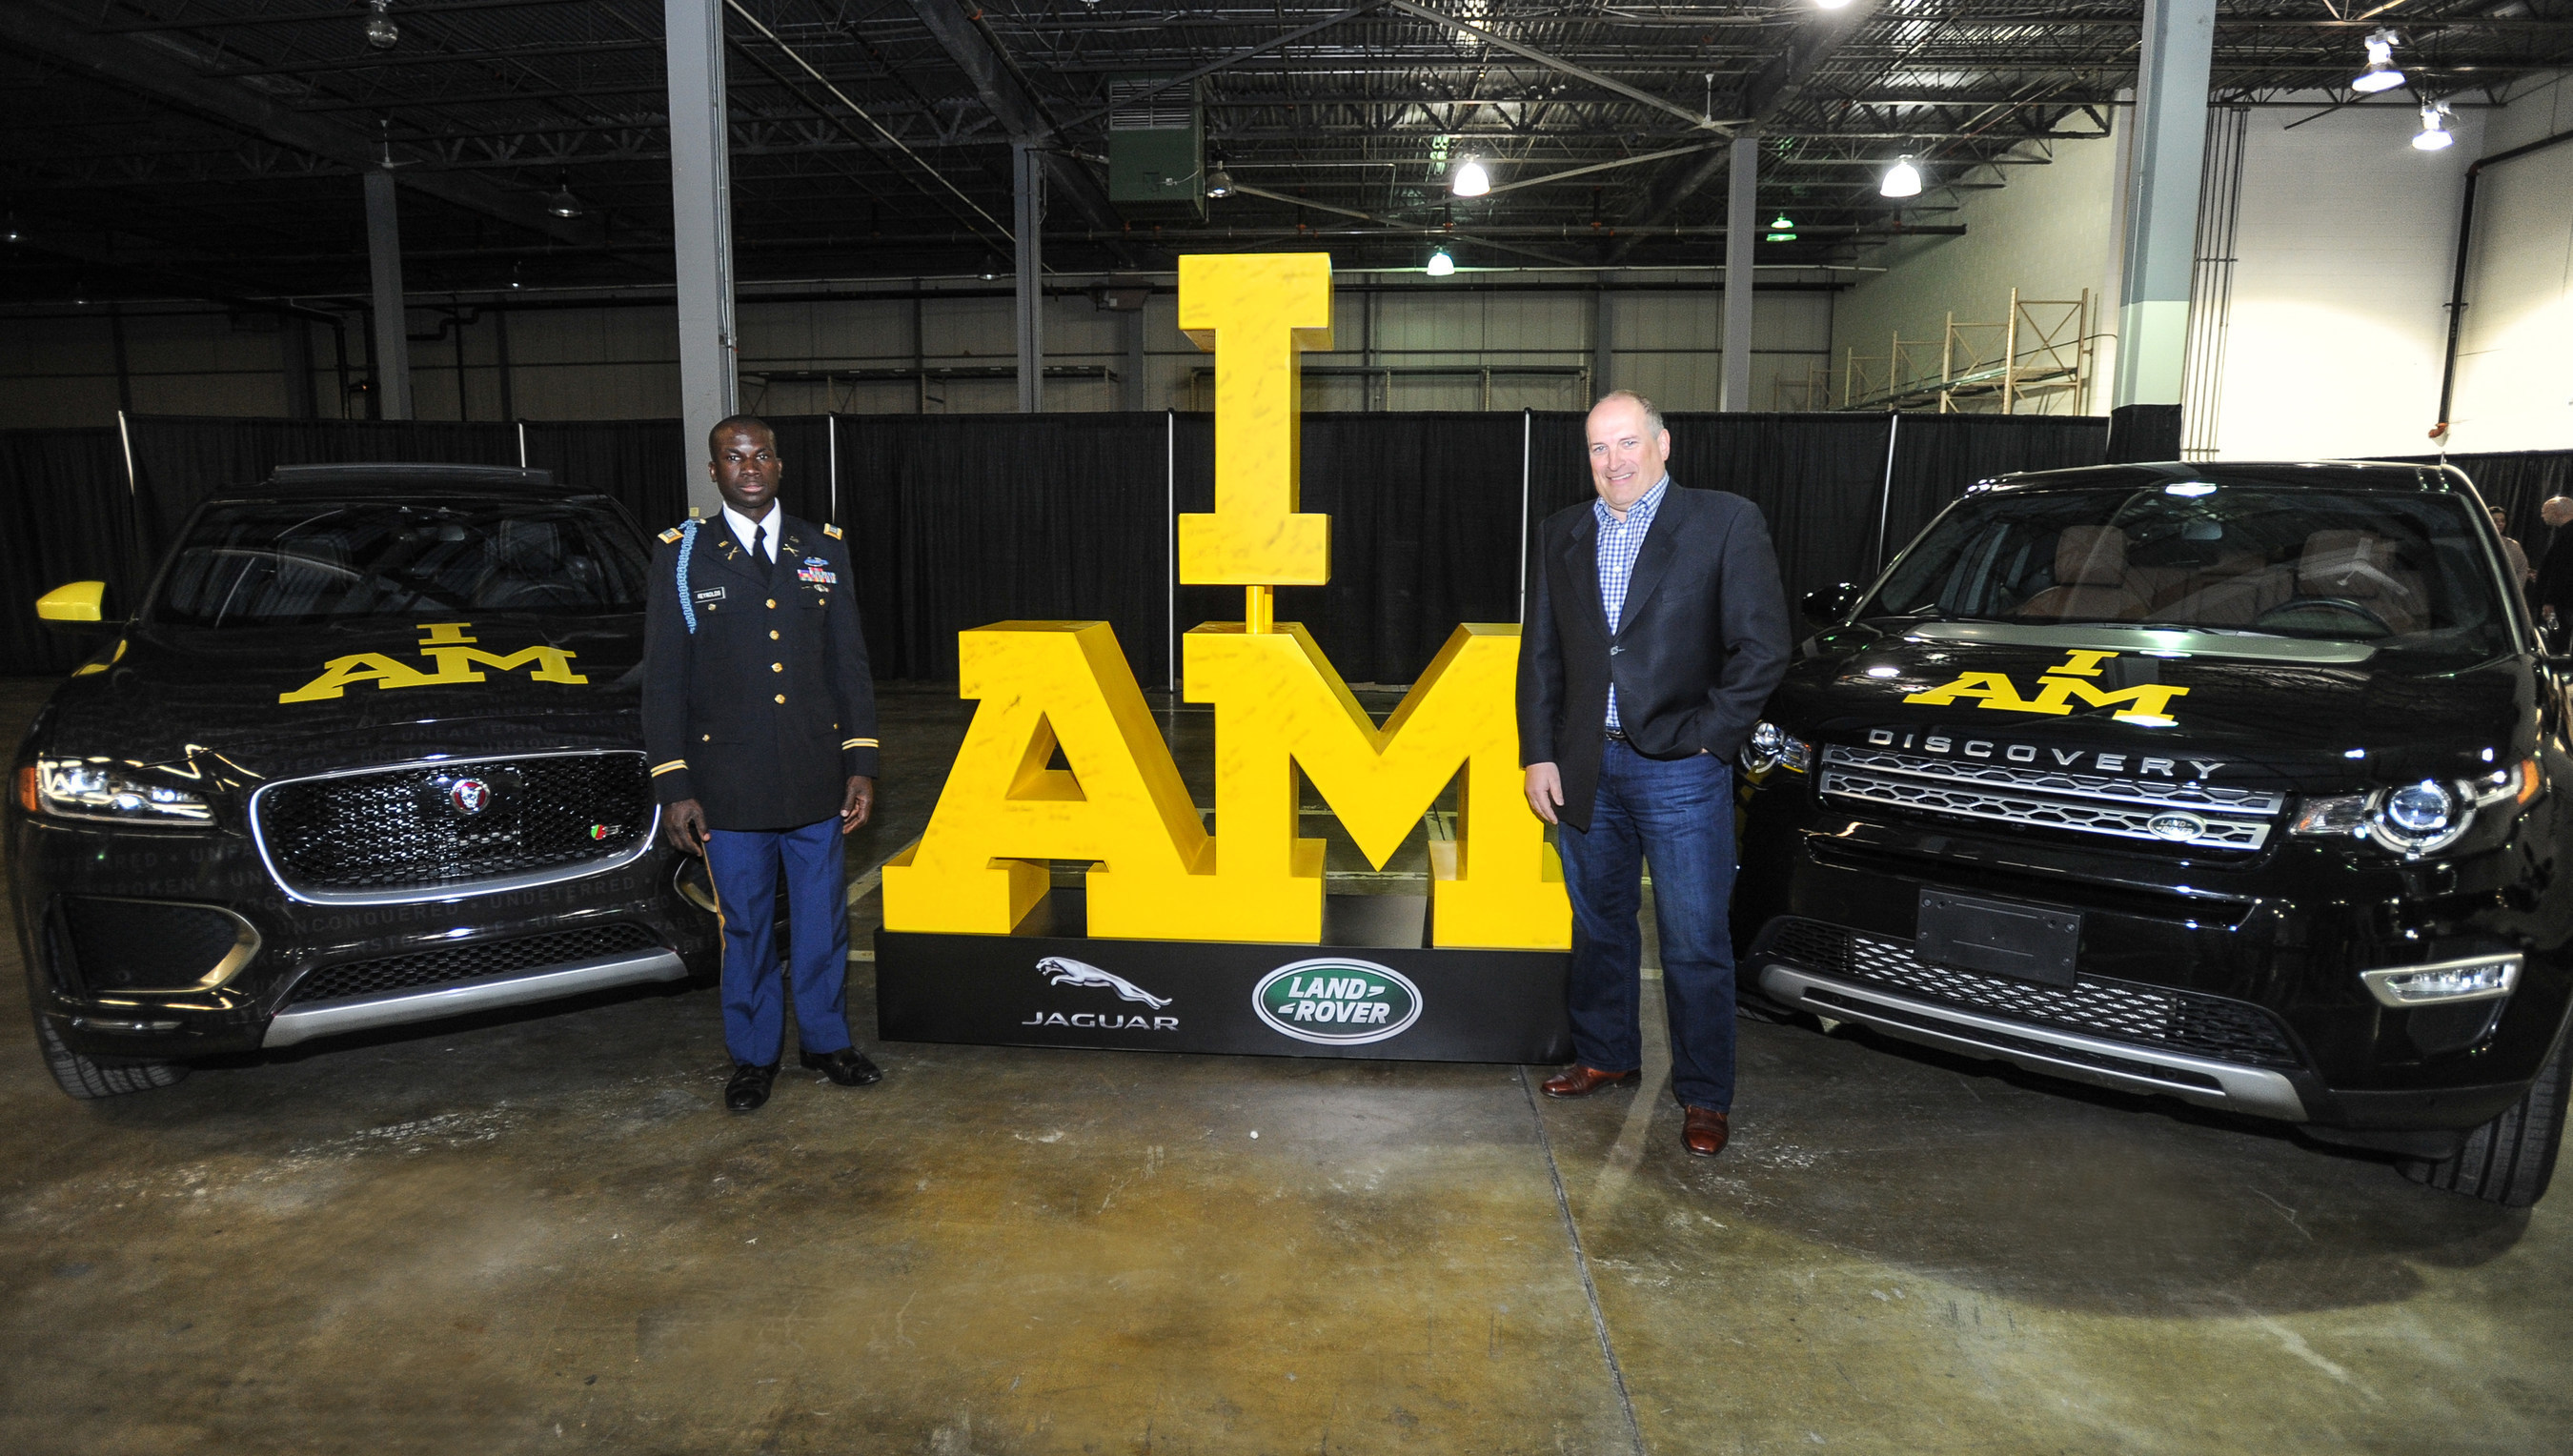 Will Reynolds, Captain of the 2016 U.S. Invictus Team (L) and Joe Eberhardt, President and CEO, Jaguar Land Rover North America (R) pose with new Jaguar F-PACE SUV, and a Land Rover Discovery Sport, ahead of the 2016  Invictus Games, the international sporting event for Wounded, Ill and Injured Service Members - presented by Jaguar Land Rover - which will take place in Orlando, FL May 8-12.